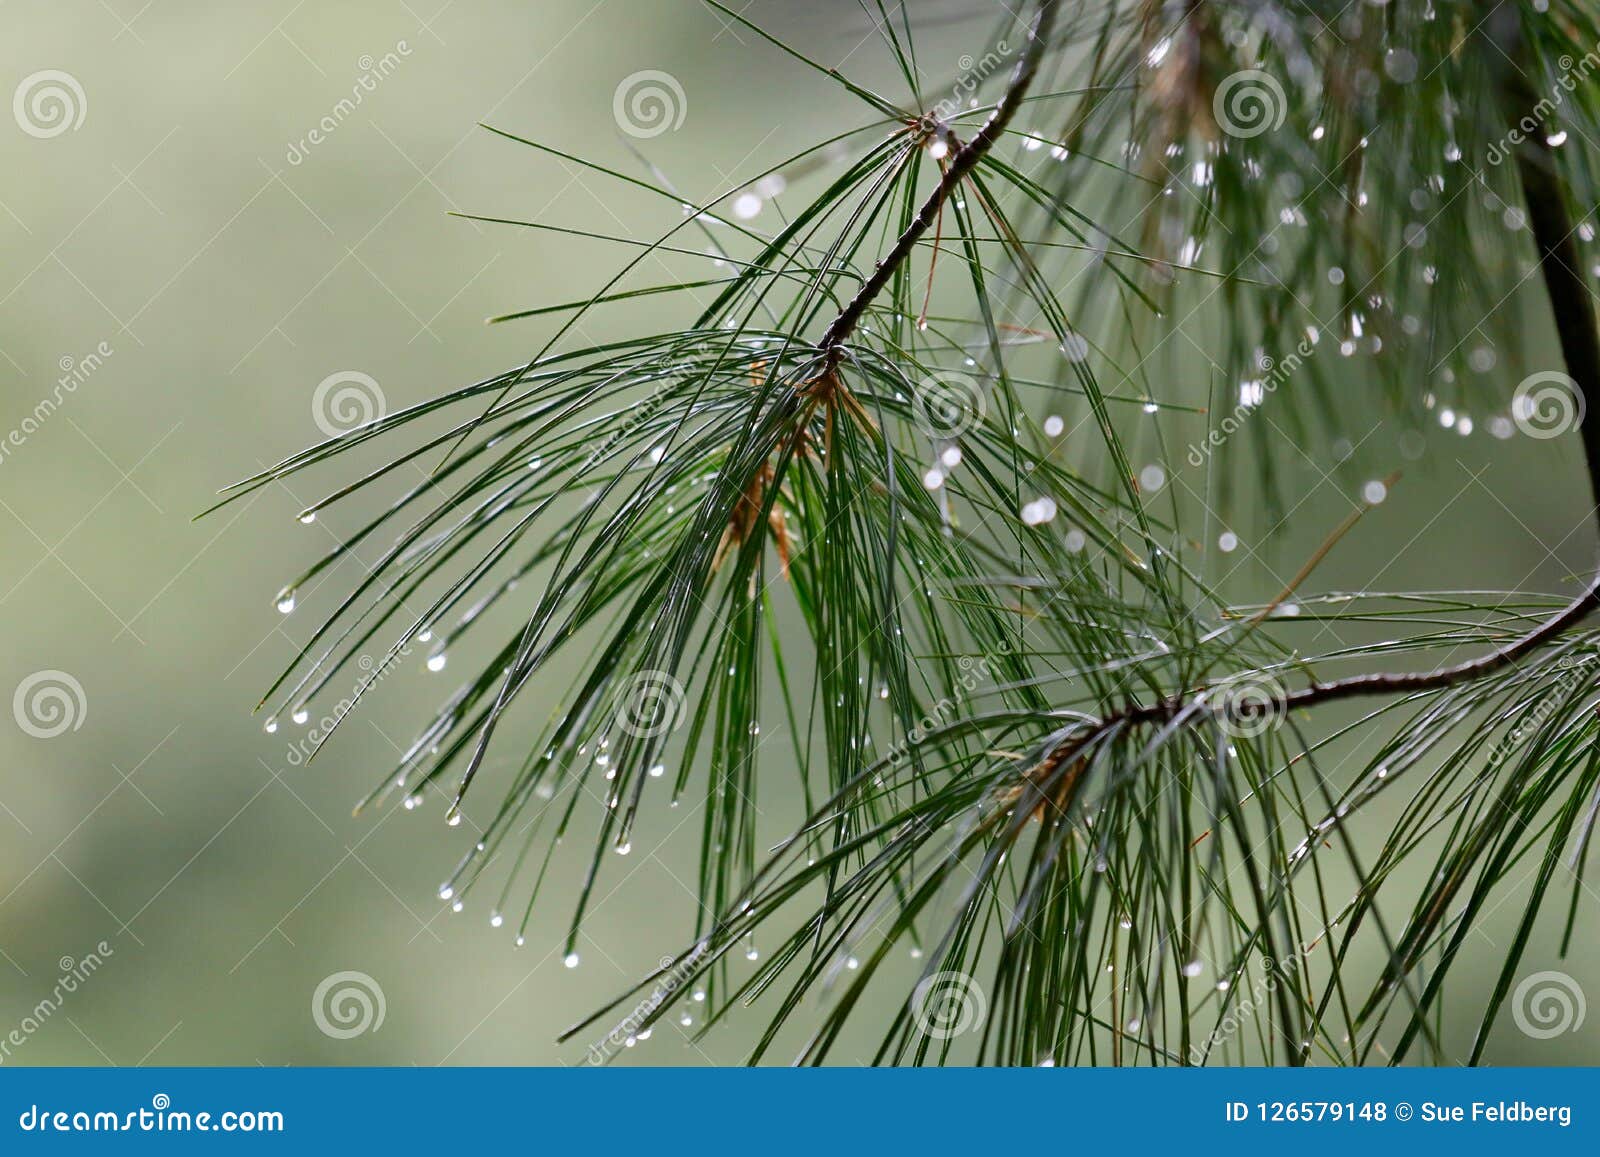 Pine Branches in the Rain stock photo. Image of rainy - 126579148